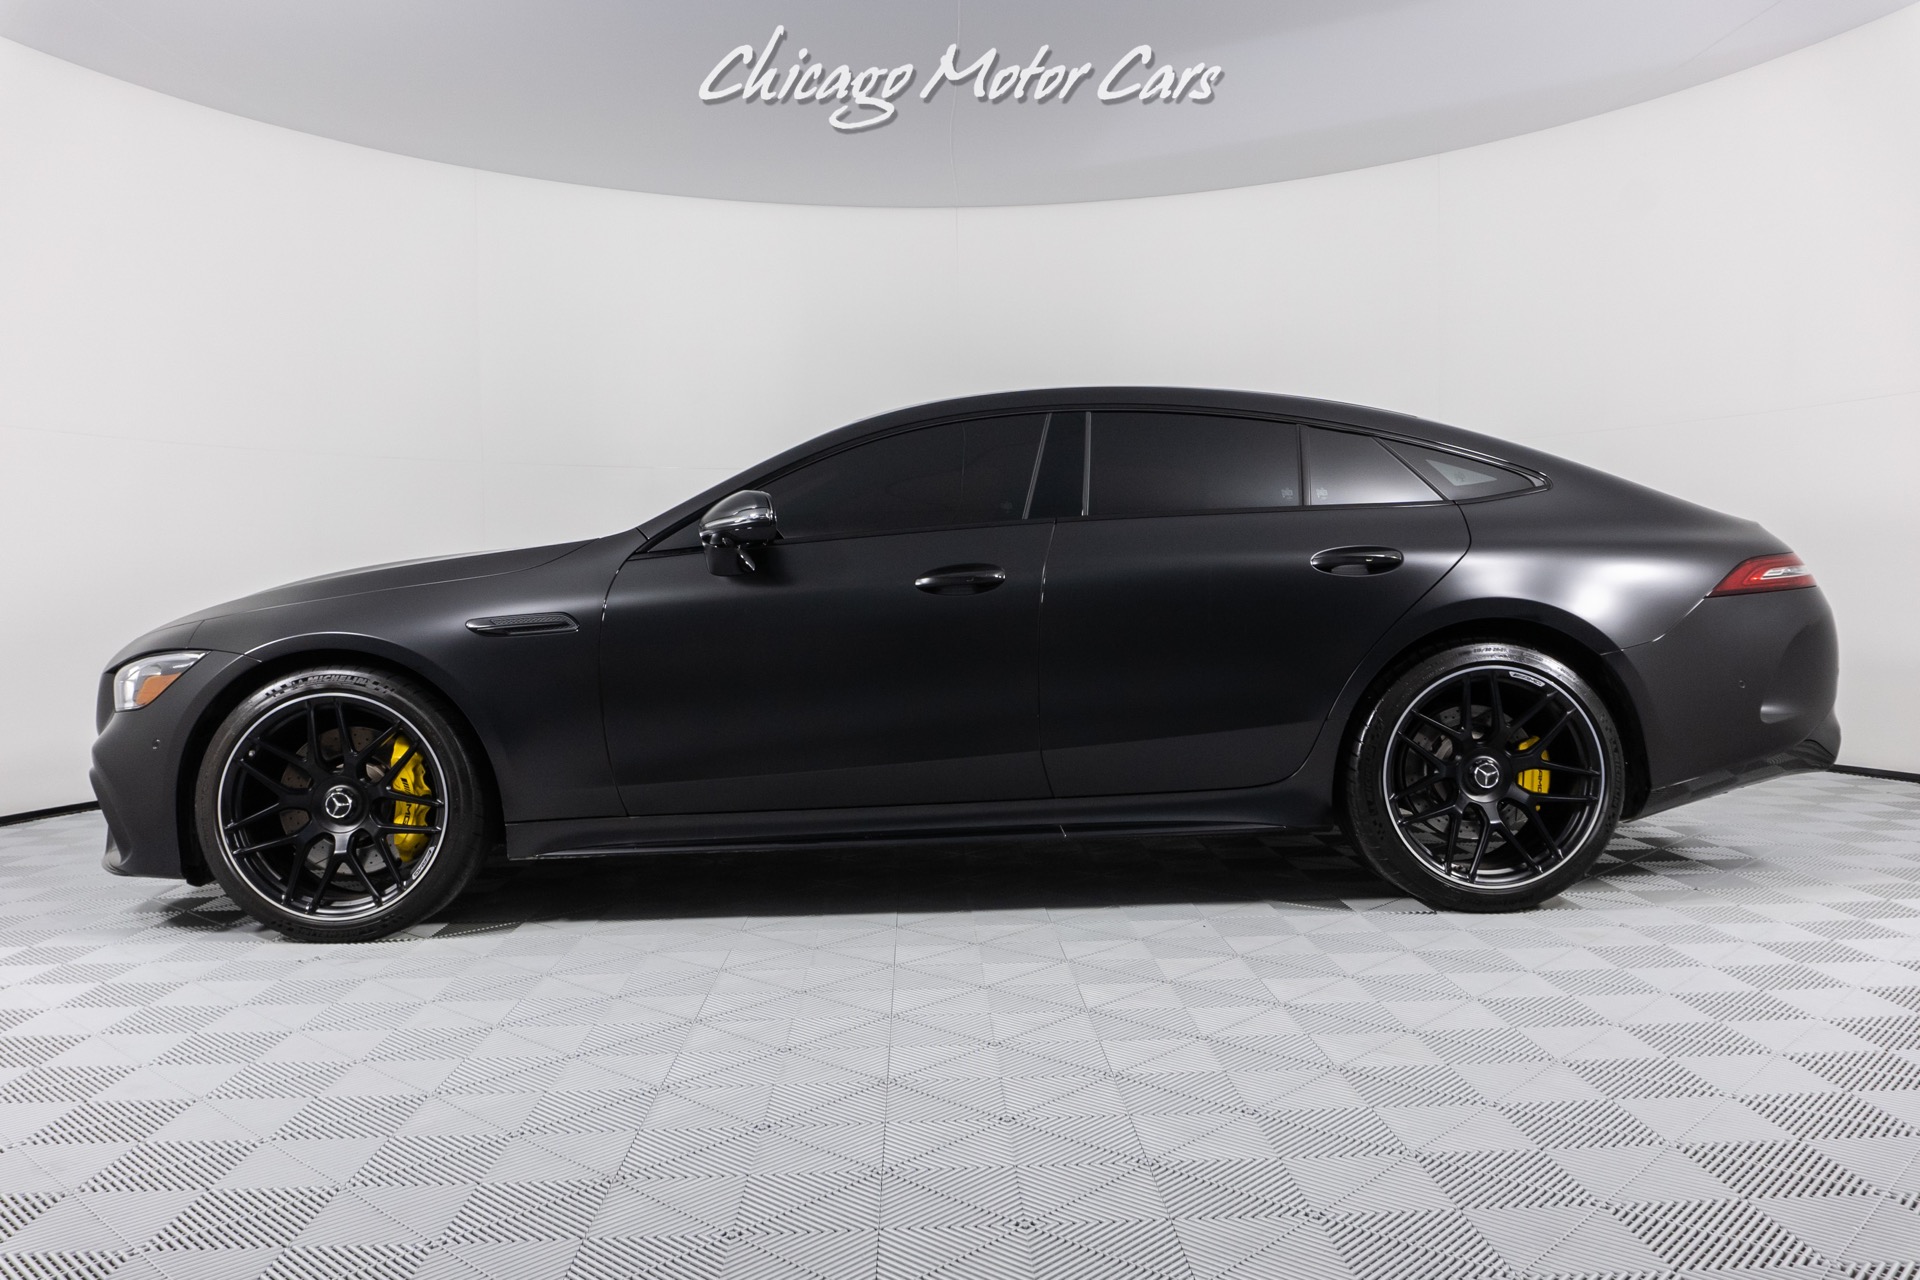 Used-2021-Mercedes-Benz-AMG-GT63S-63-S-full-stealth-ppf-Amg-performace-seats-night-package-only-13k-miles